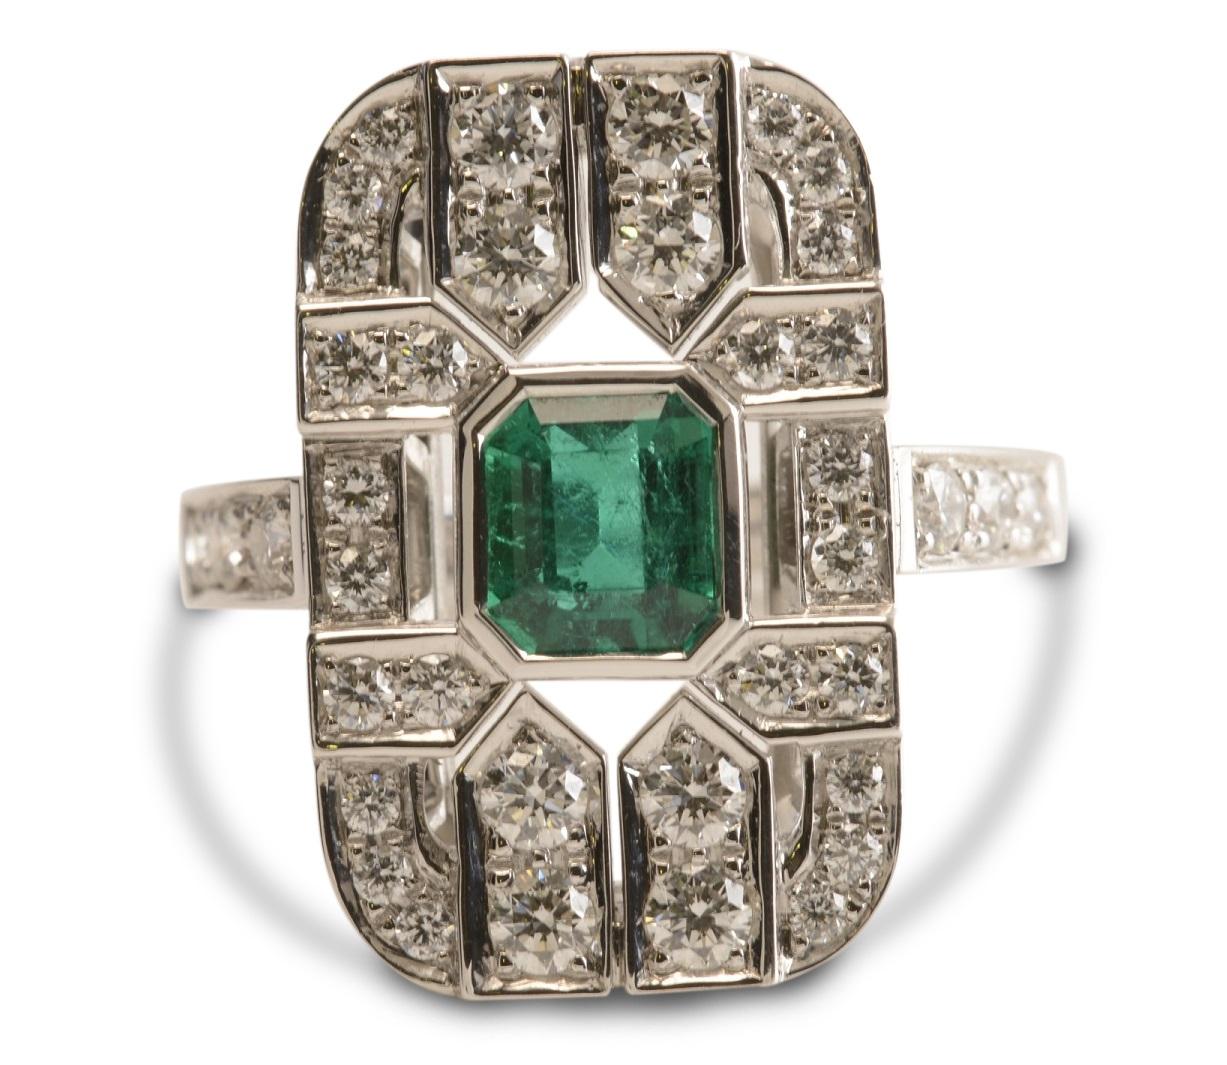 Nicky Burles has long been inspired by Art Deco fine jewellery, this beautiful, handmade, 18 karat white gold tablet ring pays homage to this classic movement. A natural emerald cut emerald of 1.28 carats floats in a fine bezel setting surrounded by